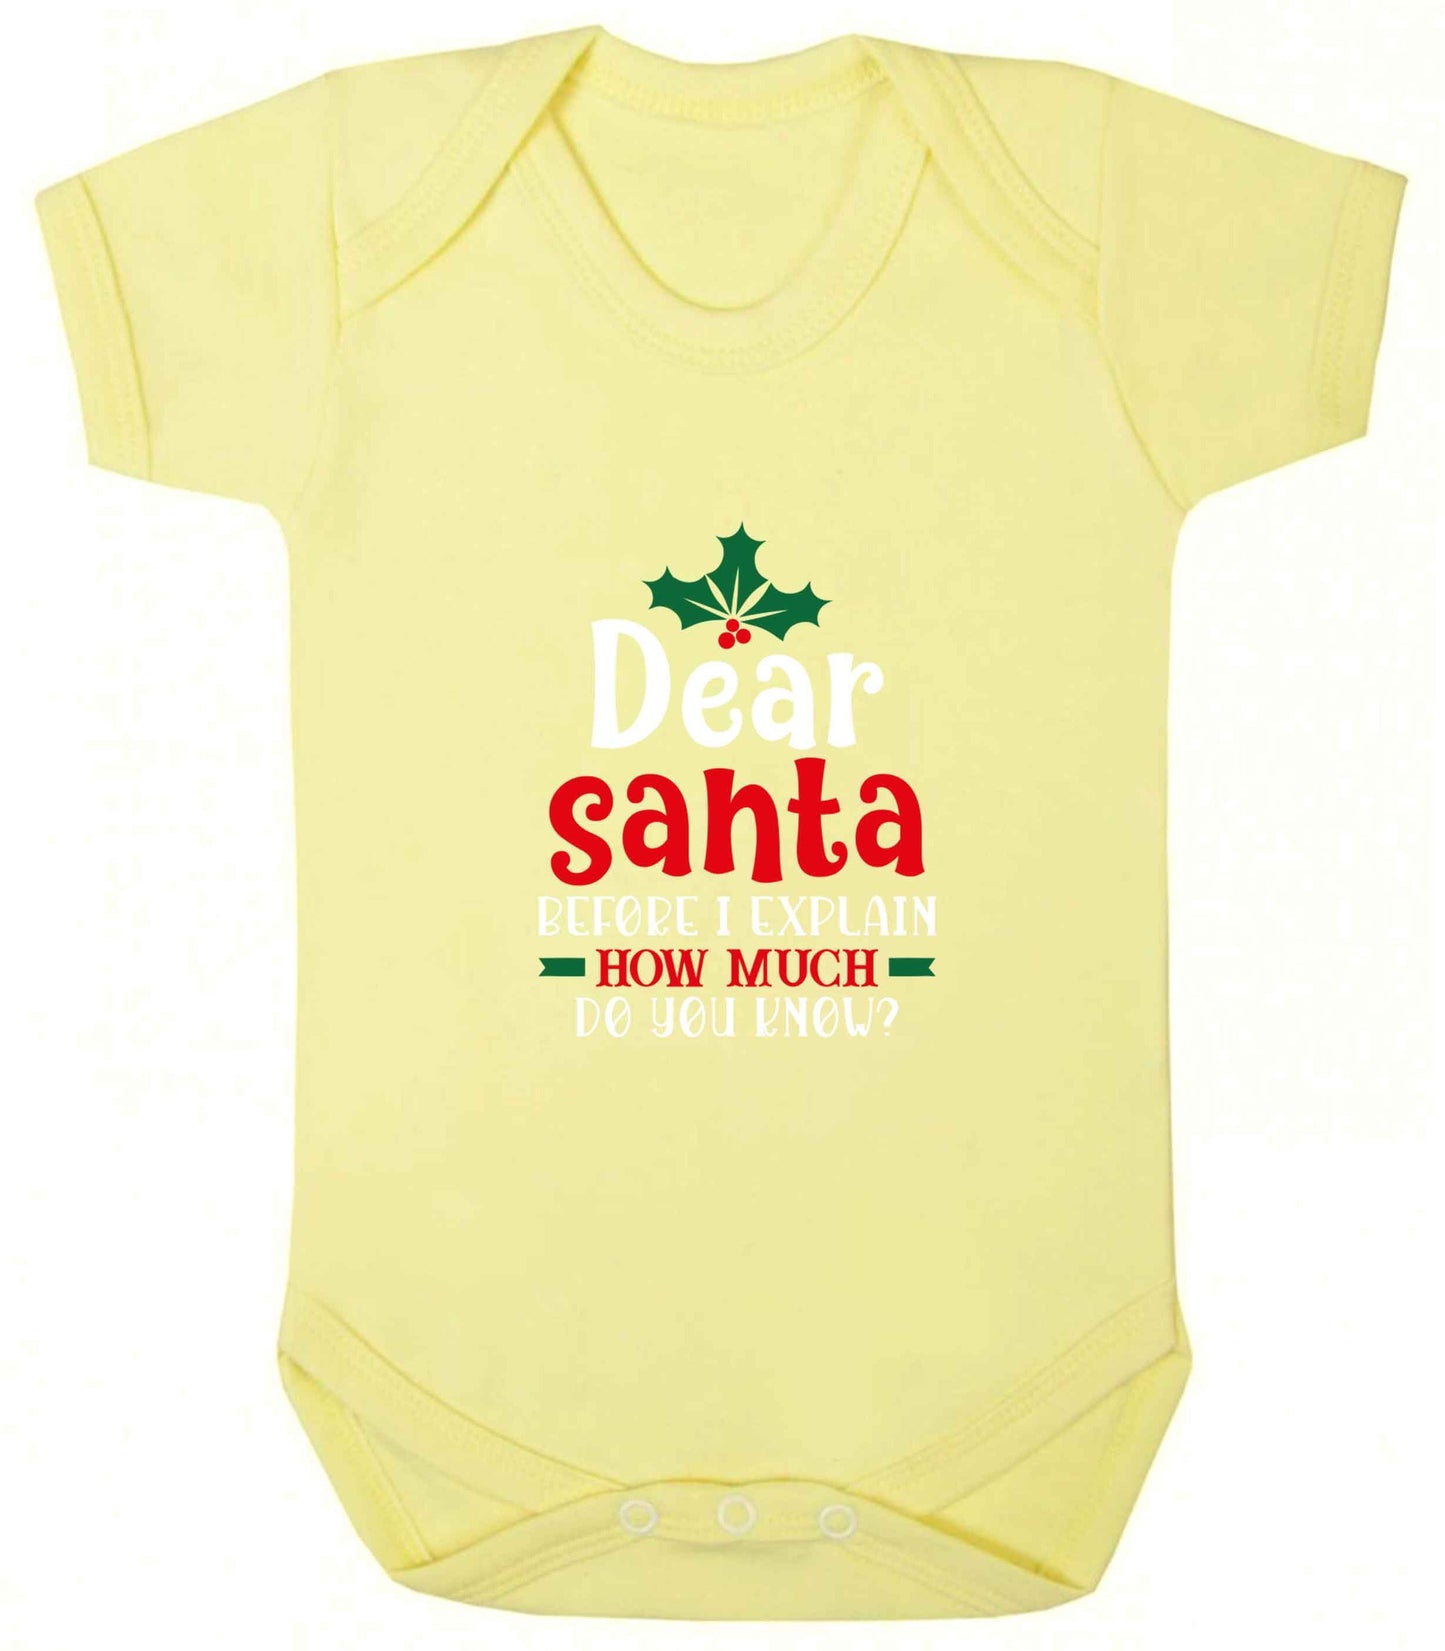 Santa before I explain how much do you know? baby vest pale yellow 18-24 months